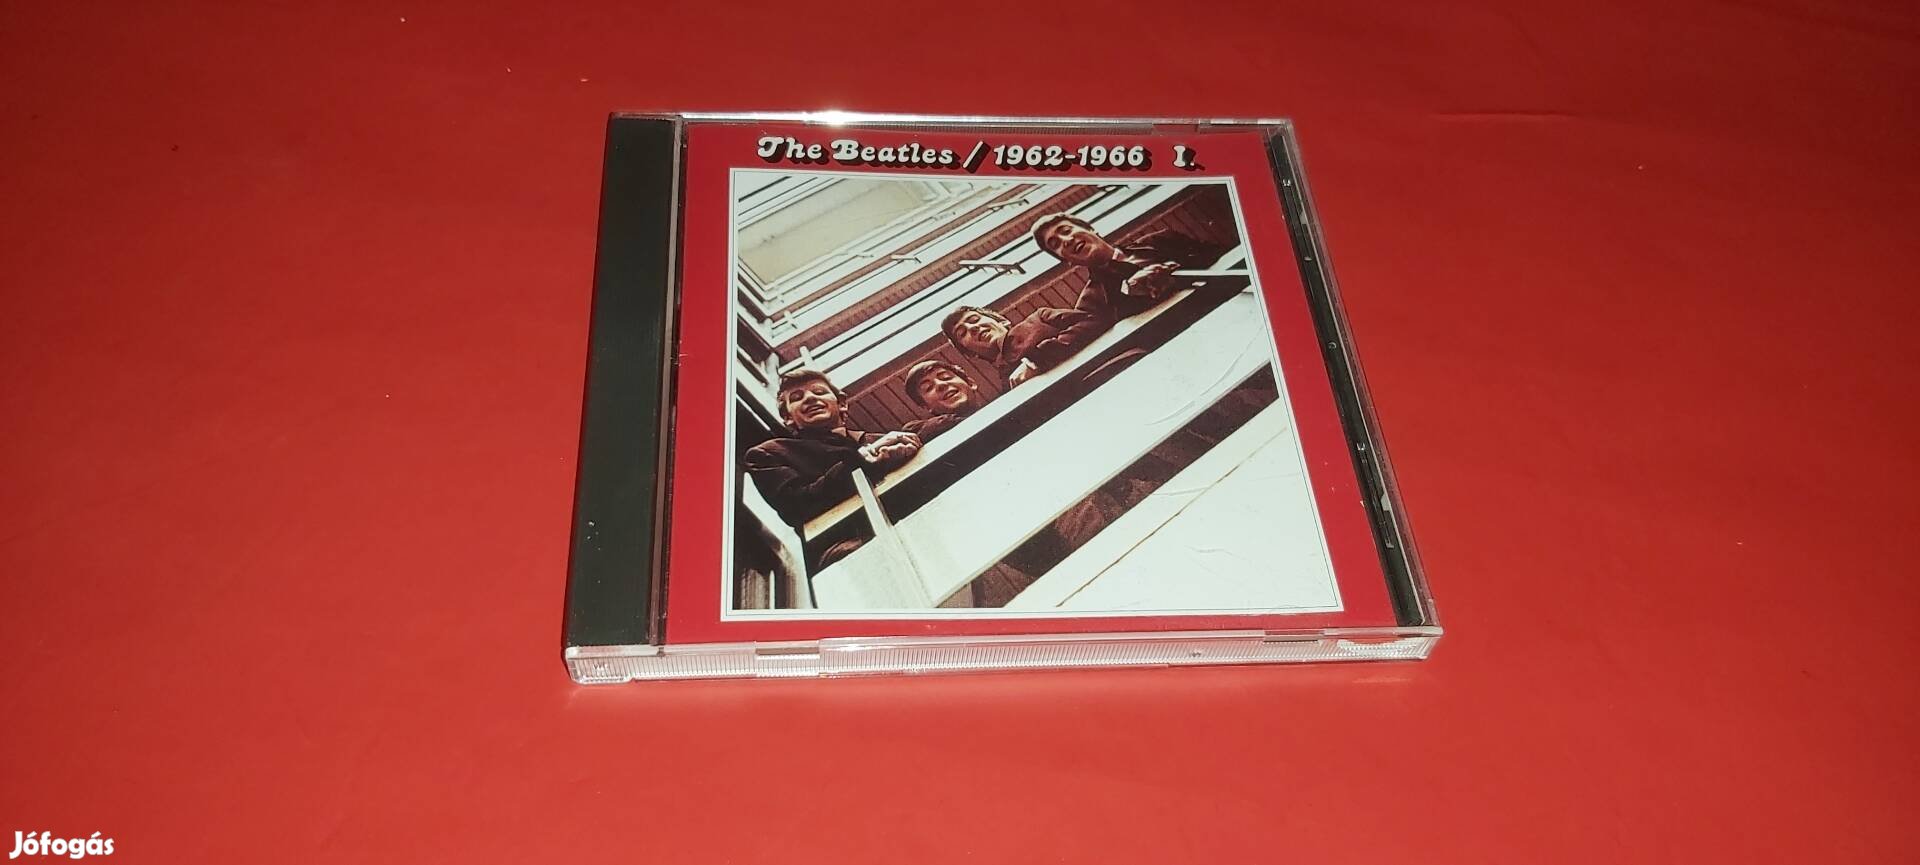 The Beatles 1962-1966 I. Cd Ring